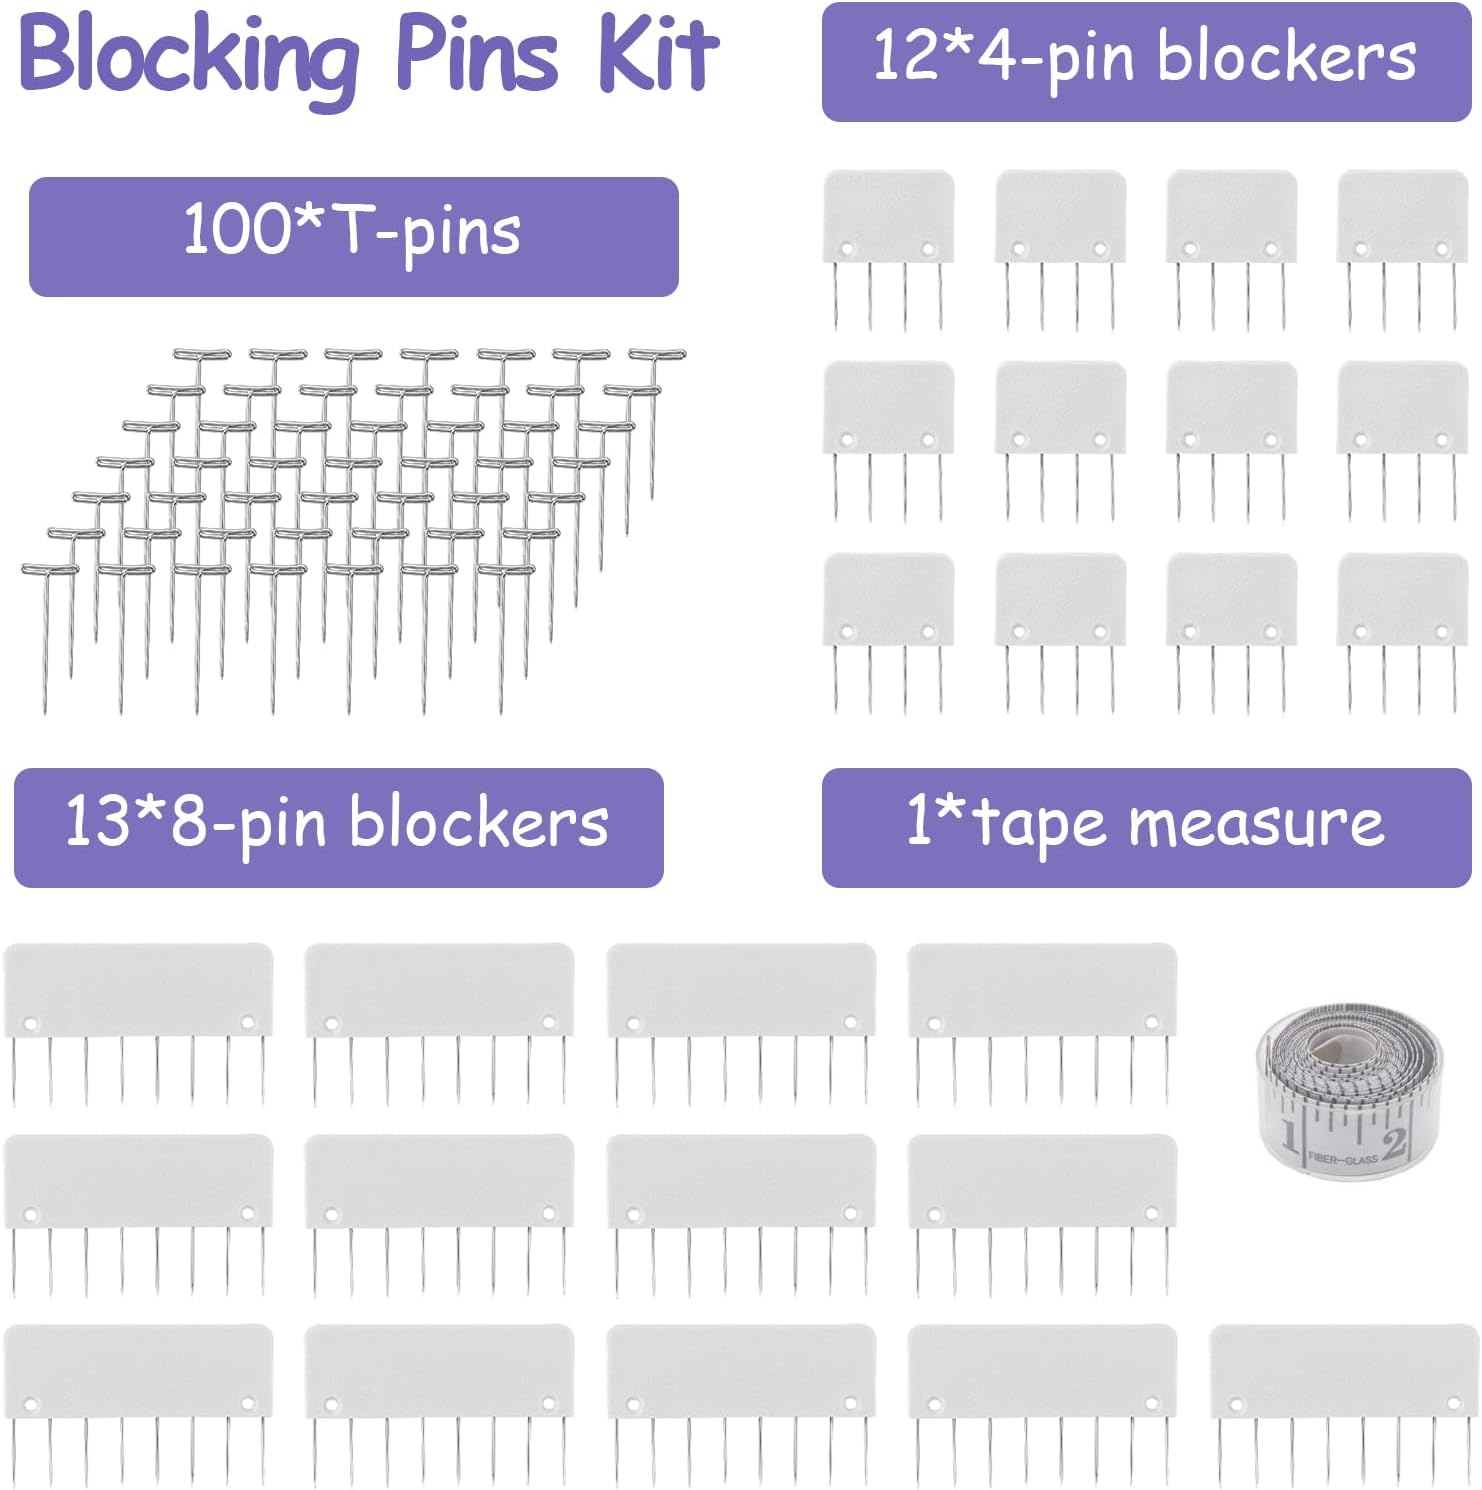 LAMXD Knit Blocking Pins Kit,Knit Blocking Combs – Set of 25 Combs for Blocking Knitting, Crochet, Lace or Needlework Projects – Extra 100 T-pins – for use with Blocking Mats for Knitting and crochet